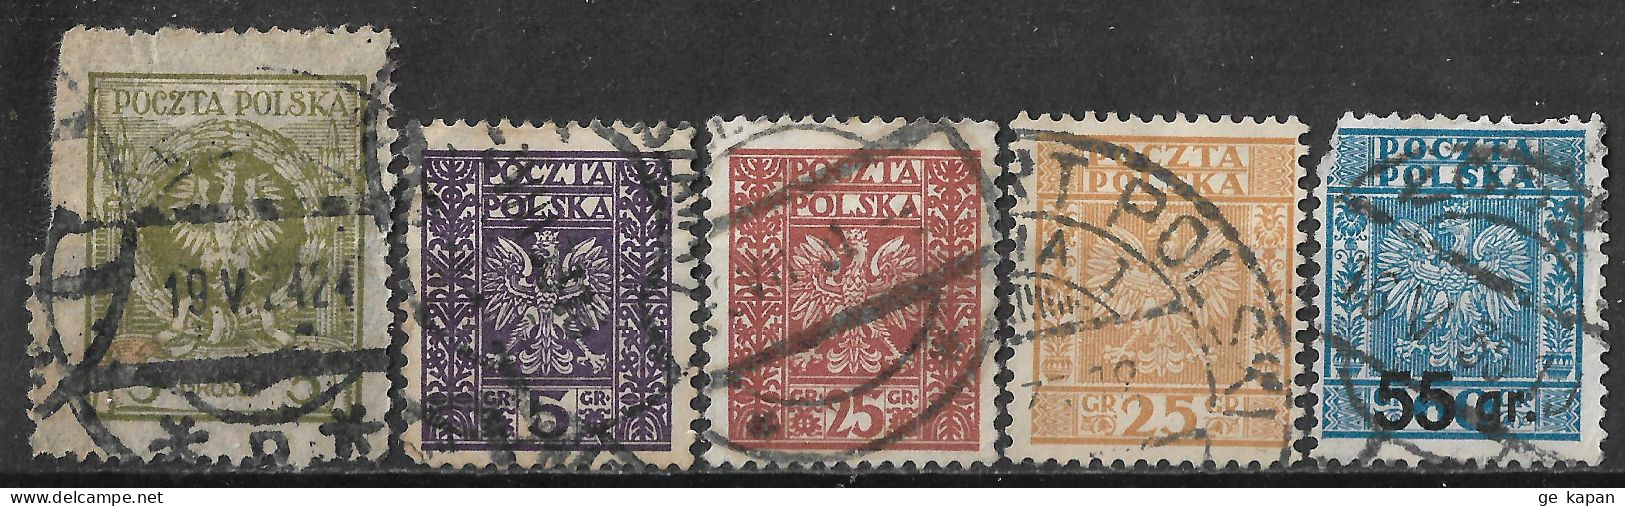 1924-1934 POLAND Set Of 5 Used Stamps (Michel # 204,261,263,276,292) CV €2.60 - Usati